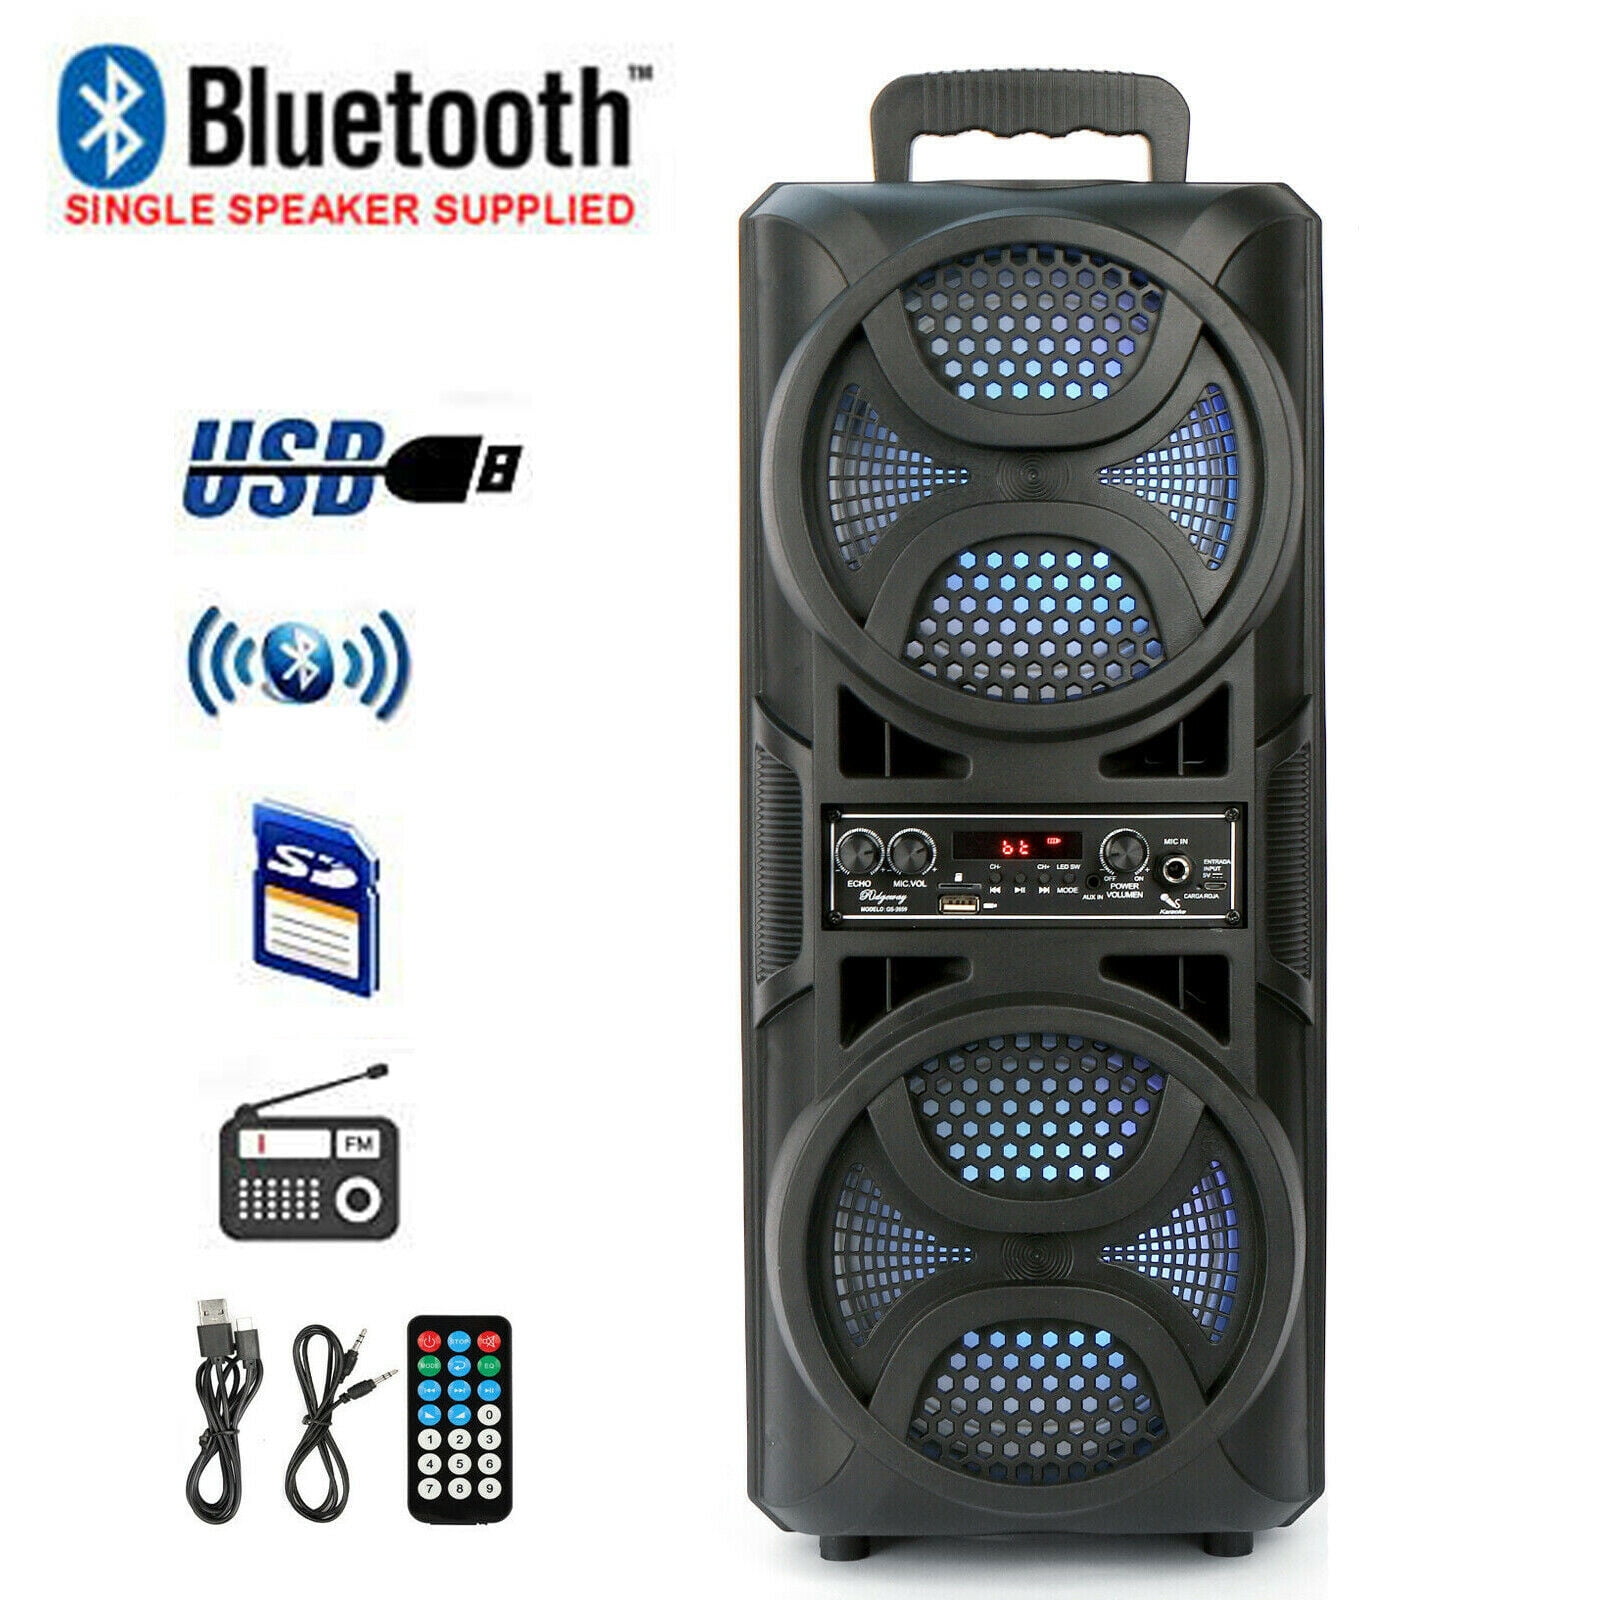 Dazone Dual 6.5" Woofer Portable FM Bluetooth Party Speaker Heavy Bass Sound Remote Control